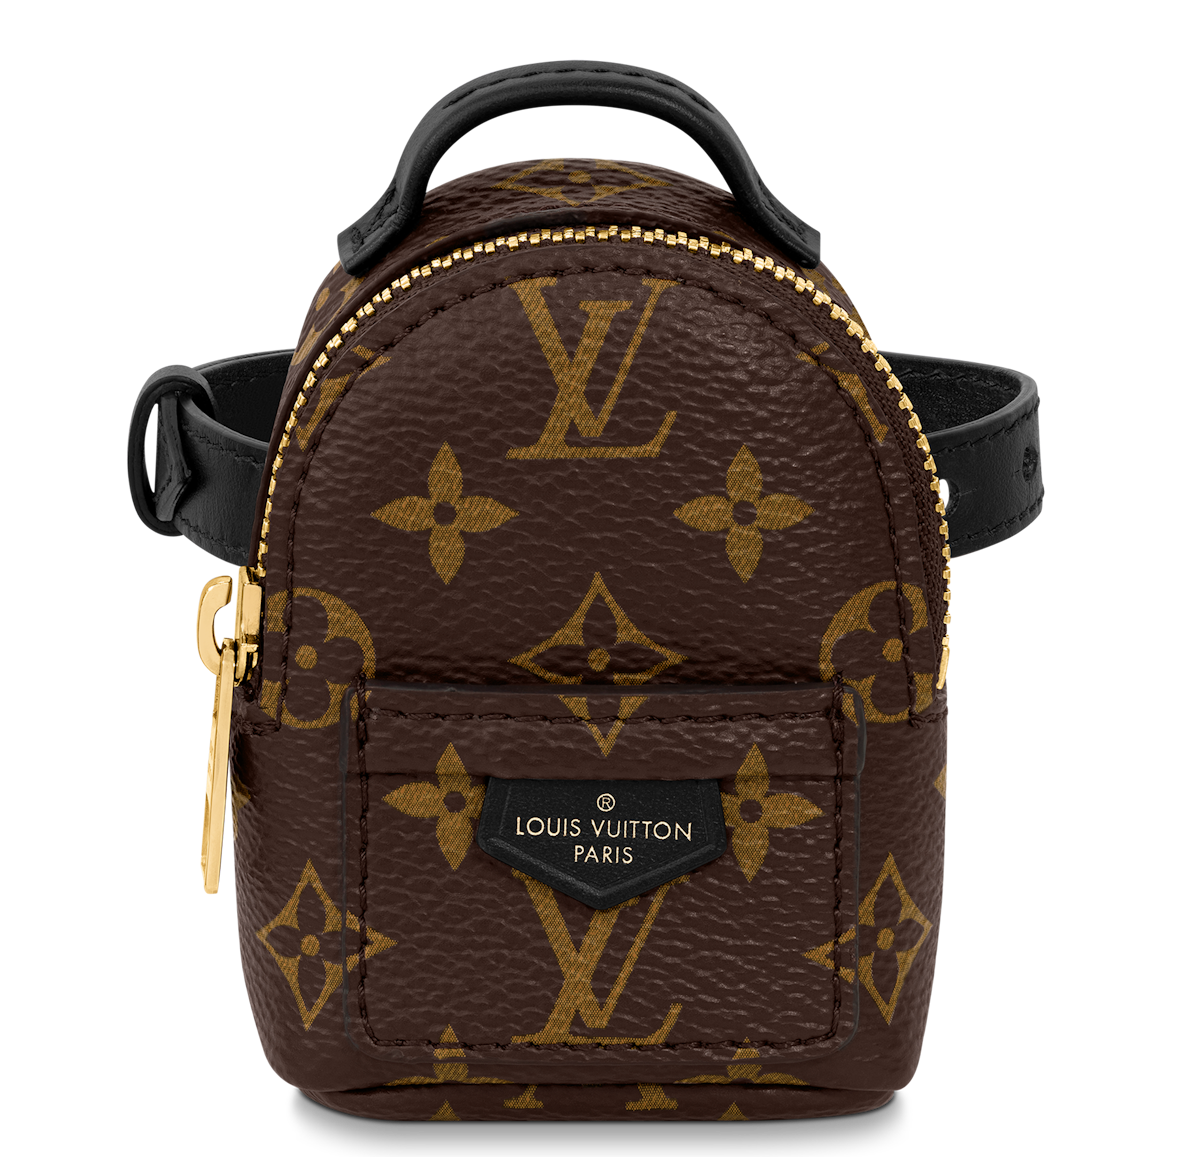 LOUIS VUITTON NICE MINI  Review, Price, & What Fits Inside with